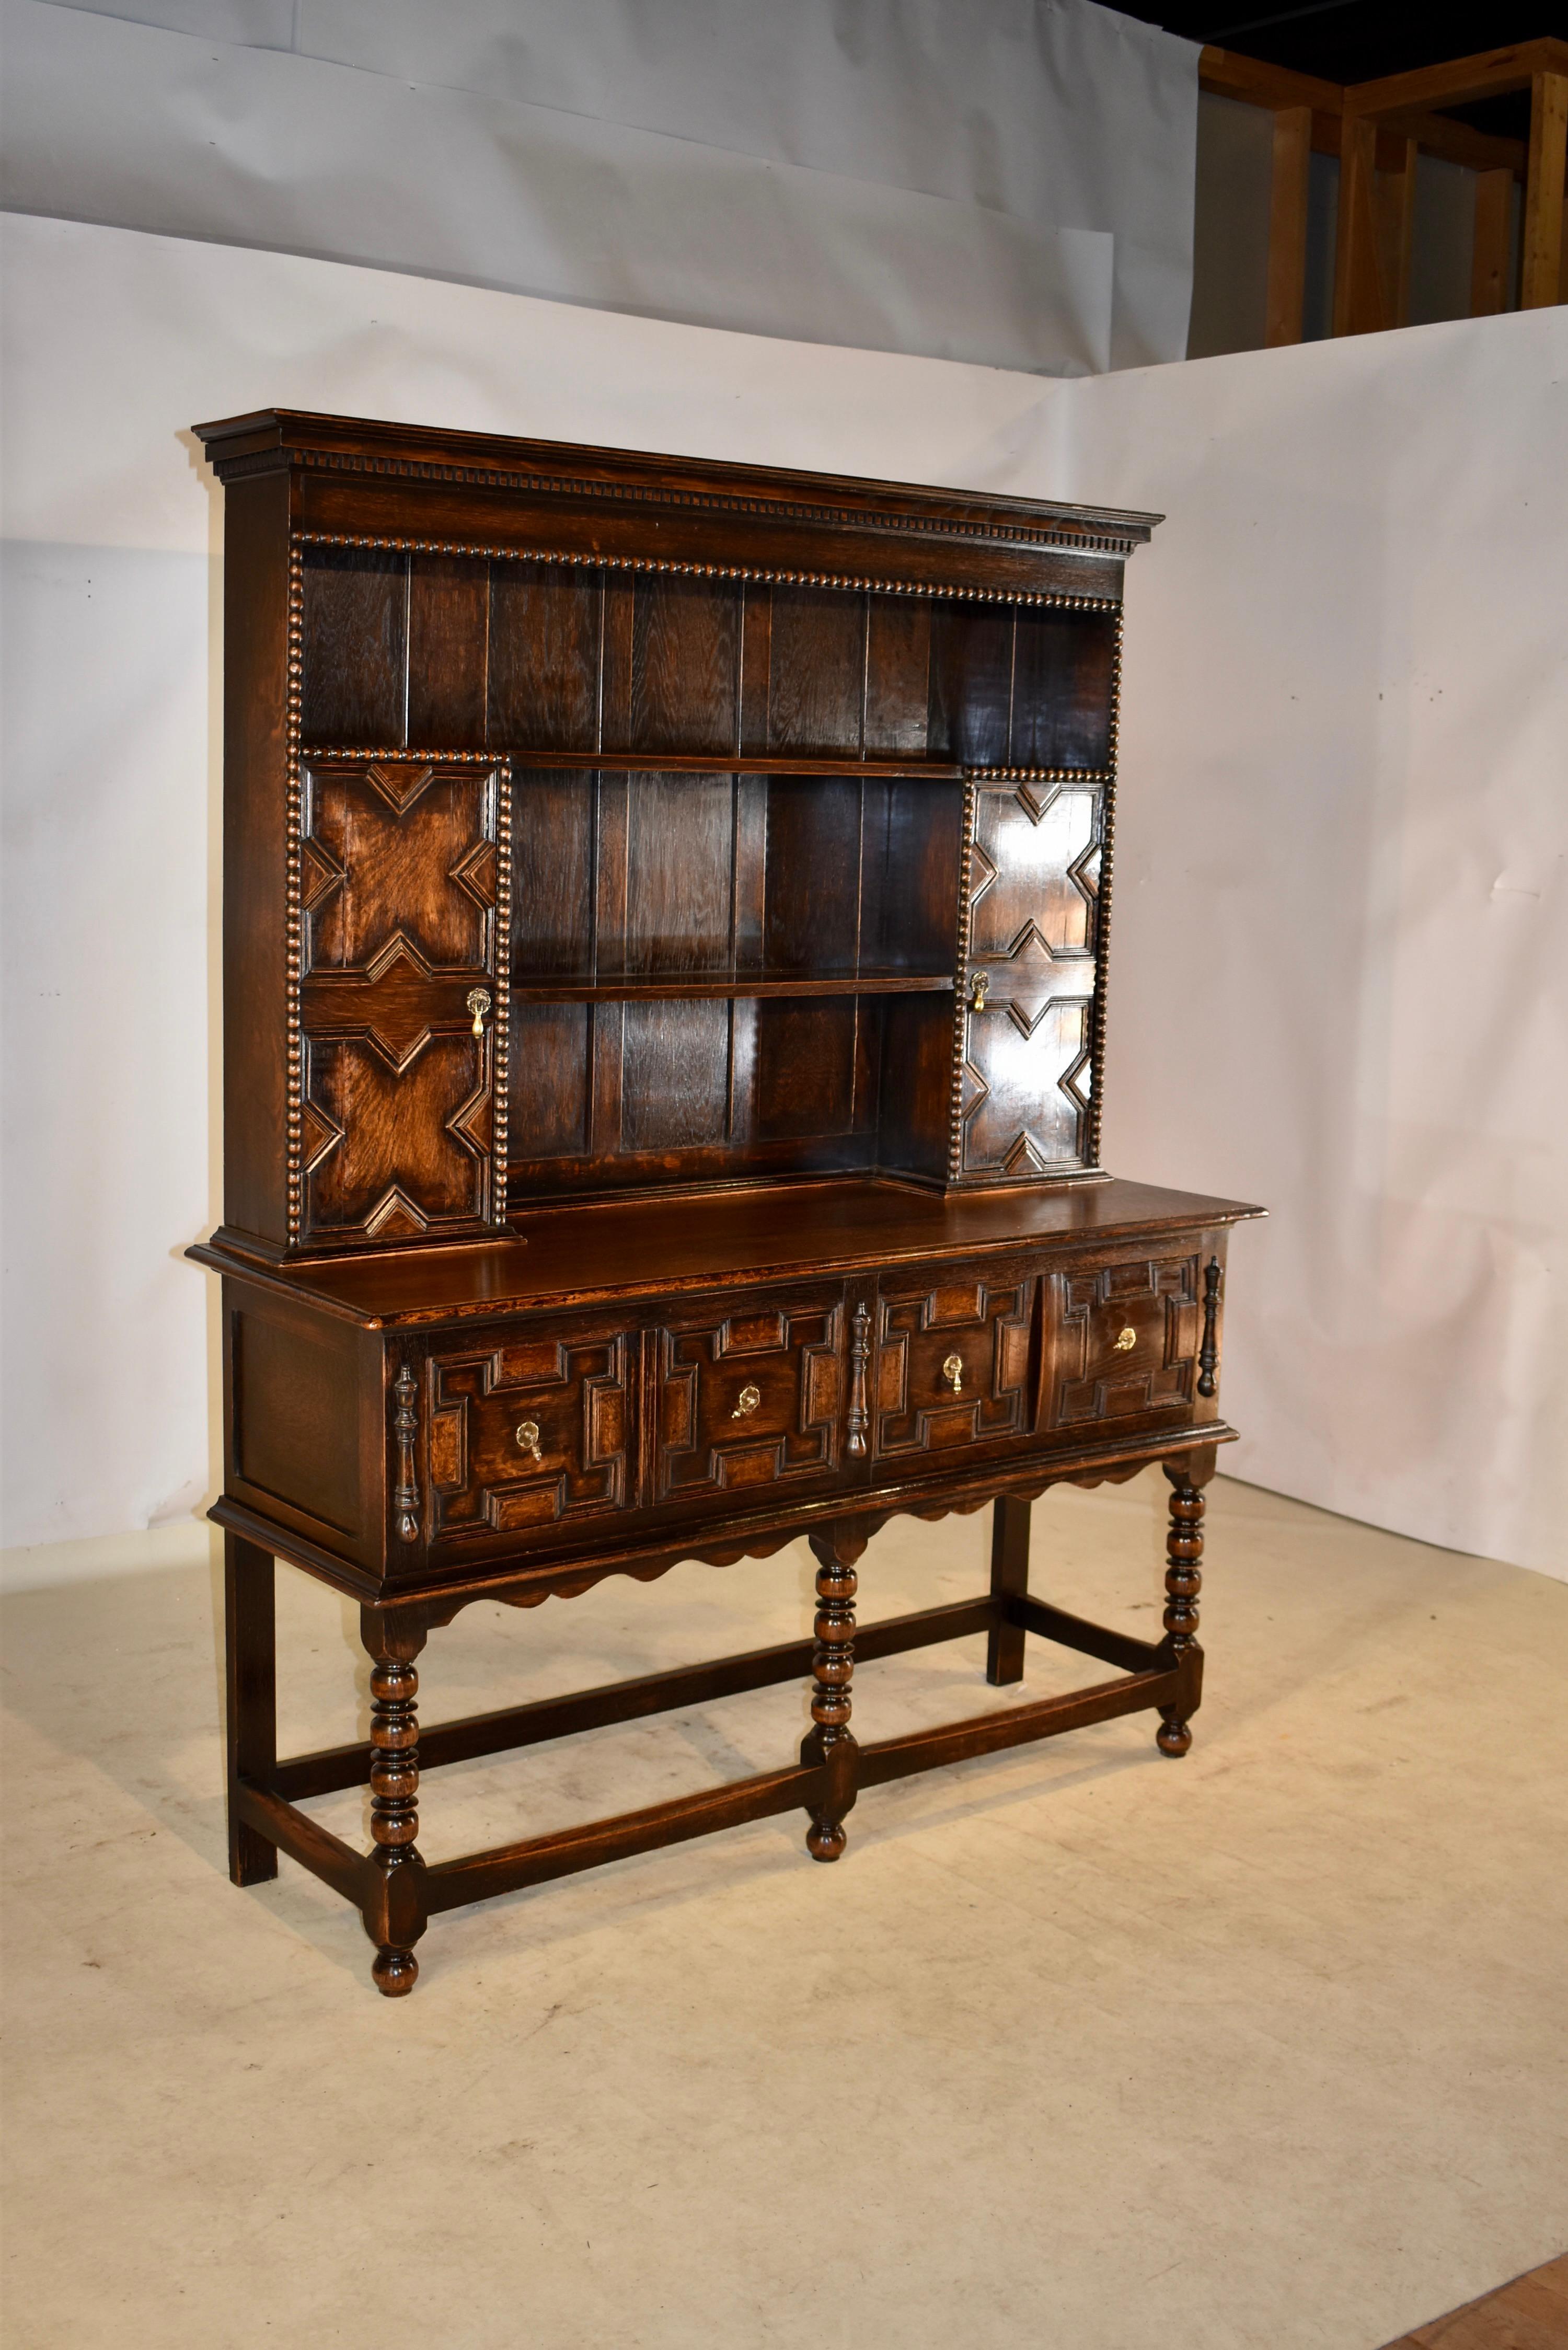 19th century oak Welsh cupboard from England. The cupboard is made in two pieces for easy moving. The top has a crown over a simple apron with beaded trim and solid plank back boards. There are two shelves, flanked by two cupboard doors, both with